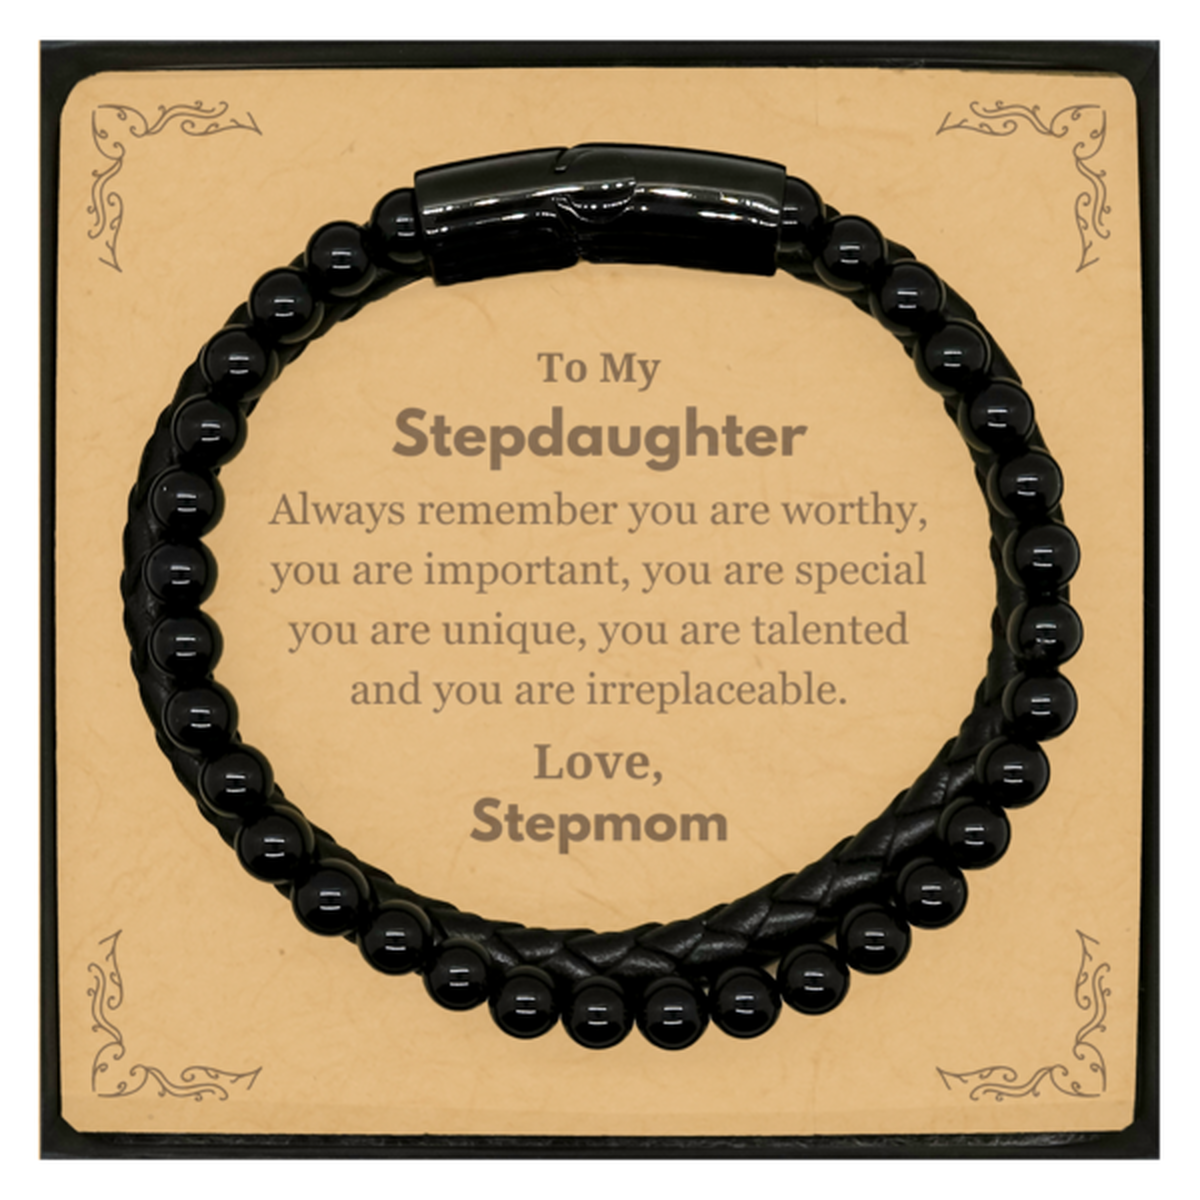 Stepdaughter Birthday Gifts from Stepmom, Inspirational Stone Leather Bracelets for Stepdaughter Christmas Graduation Gifts for Stepdaughter Always remember you are worthy, you are important. Love, Stepmom